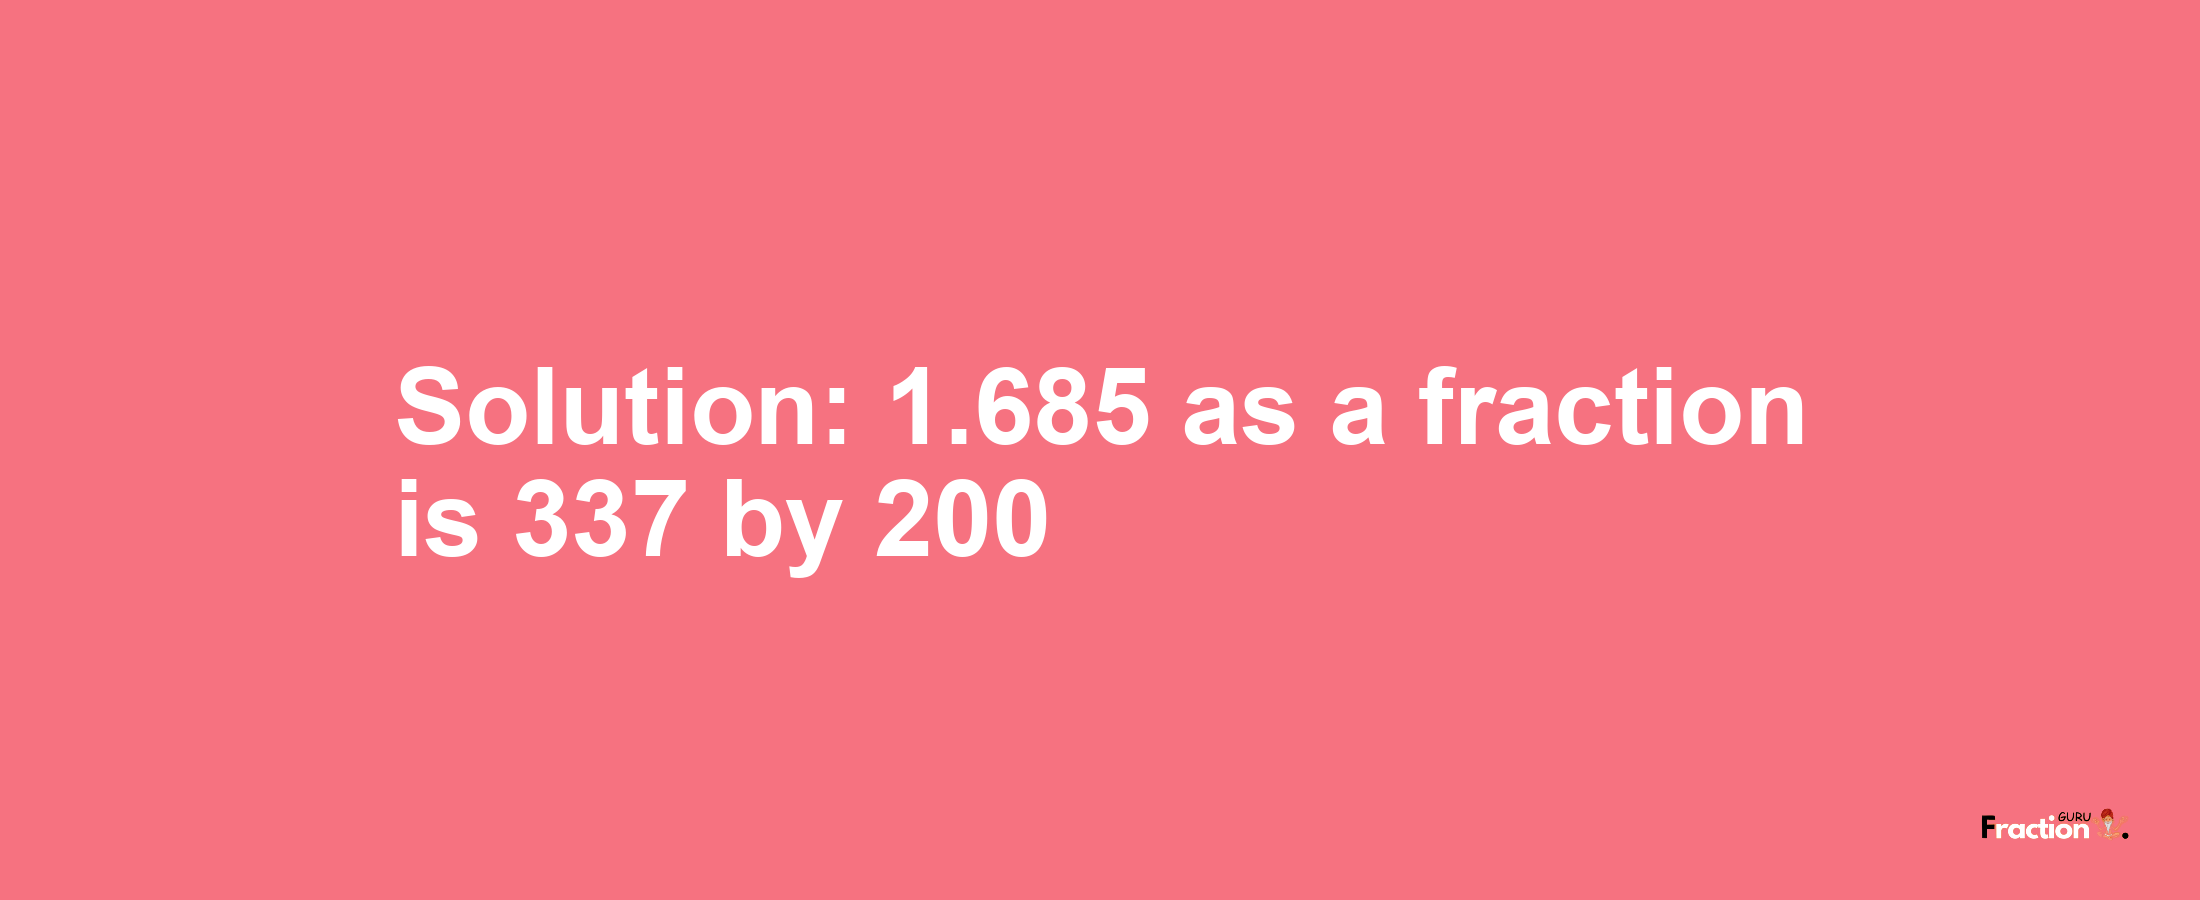 Solution:1.685 as a fraction is 337/200